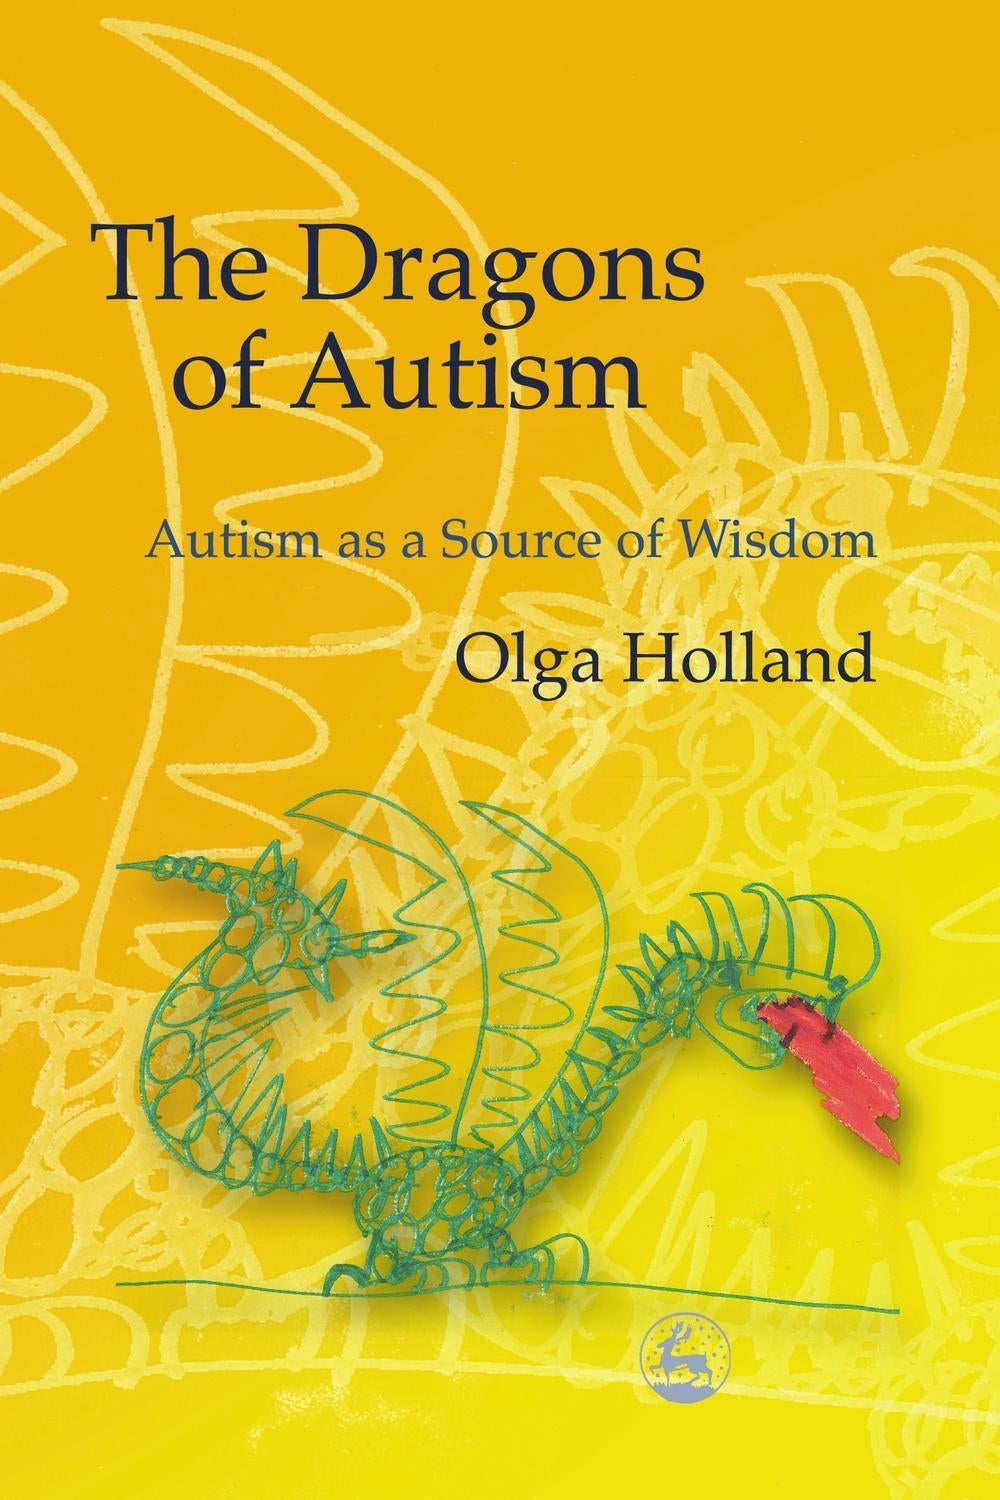 The Dragons of Autism by Olga Holland